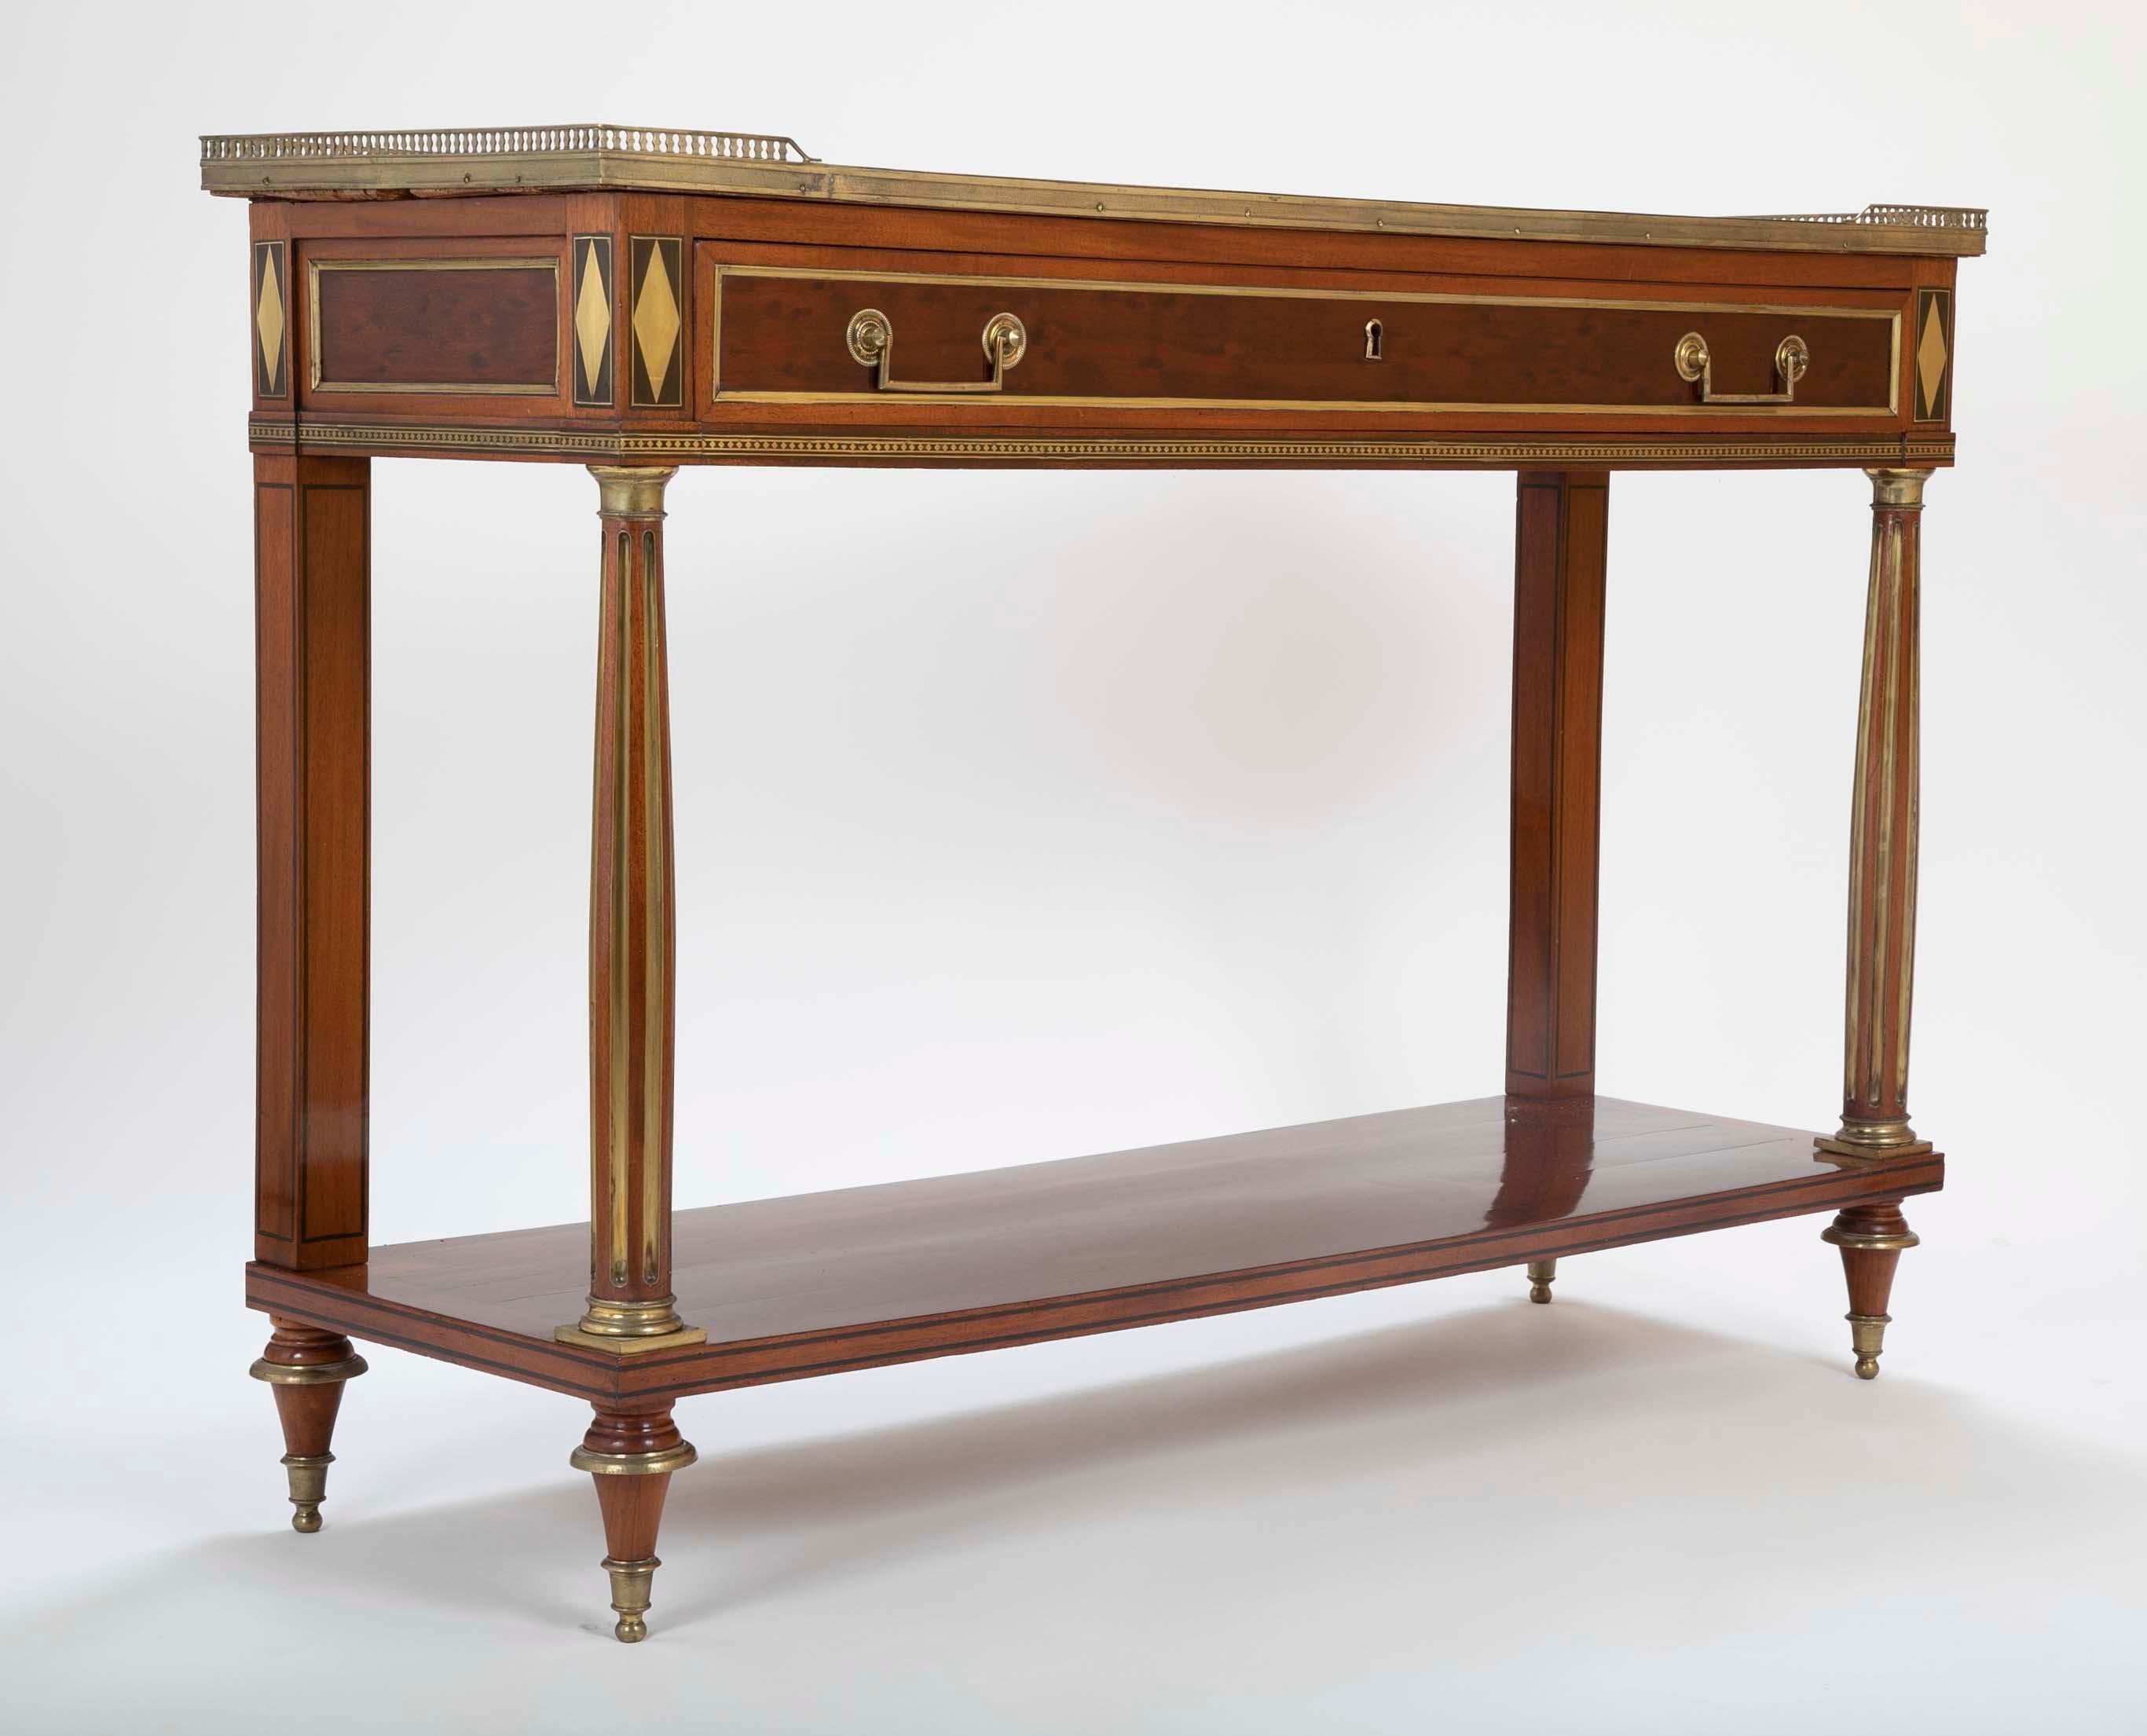 A beautiful French Louis XVI style mahogany desserte table having a marble top and wonderful brass gallery.